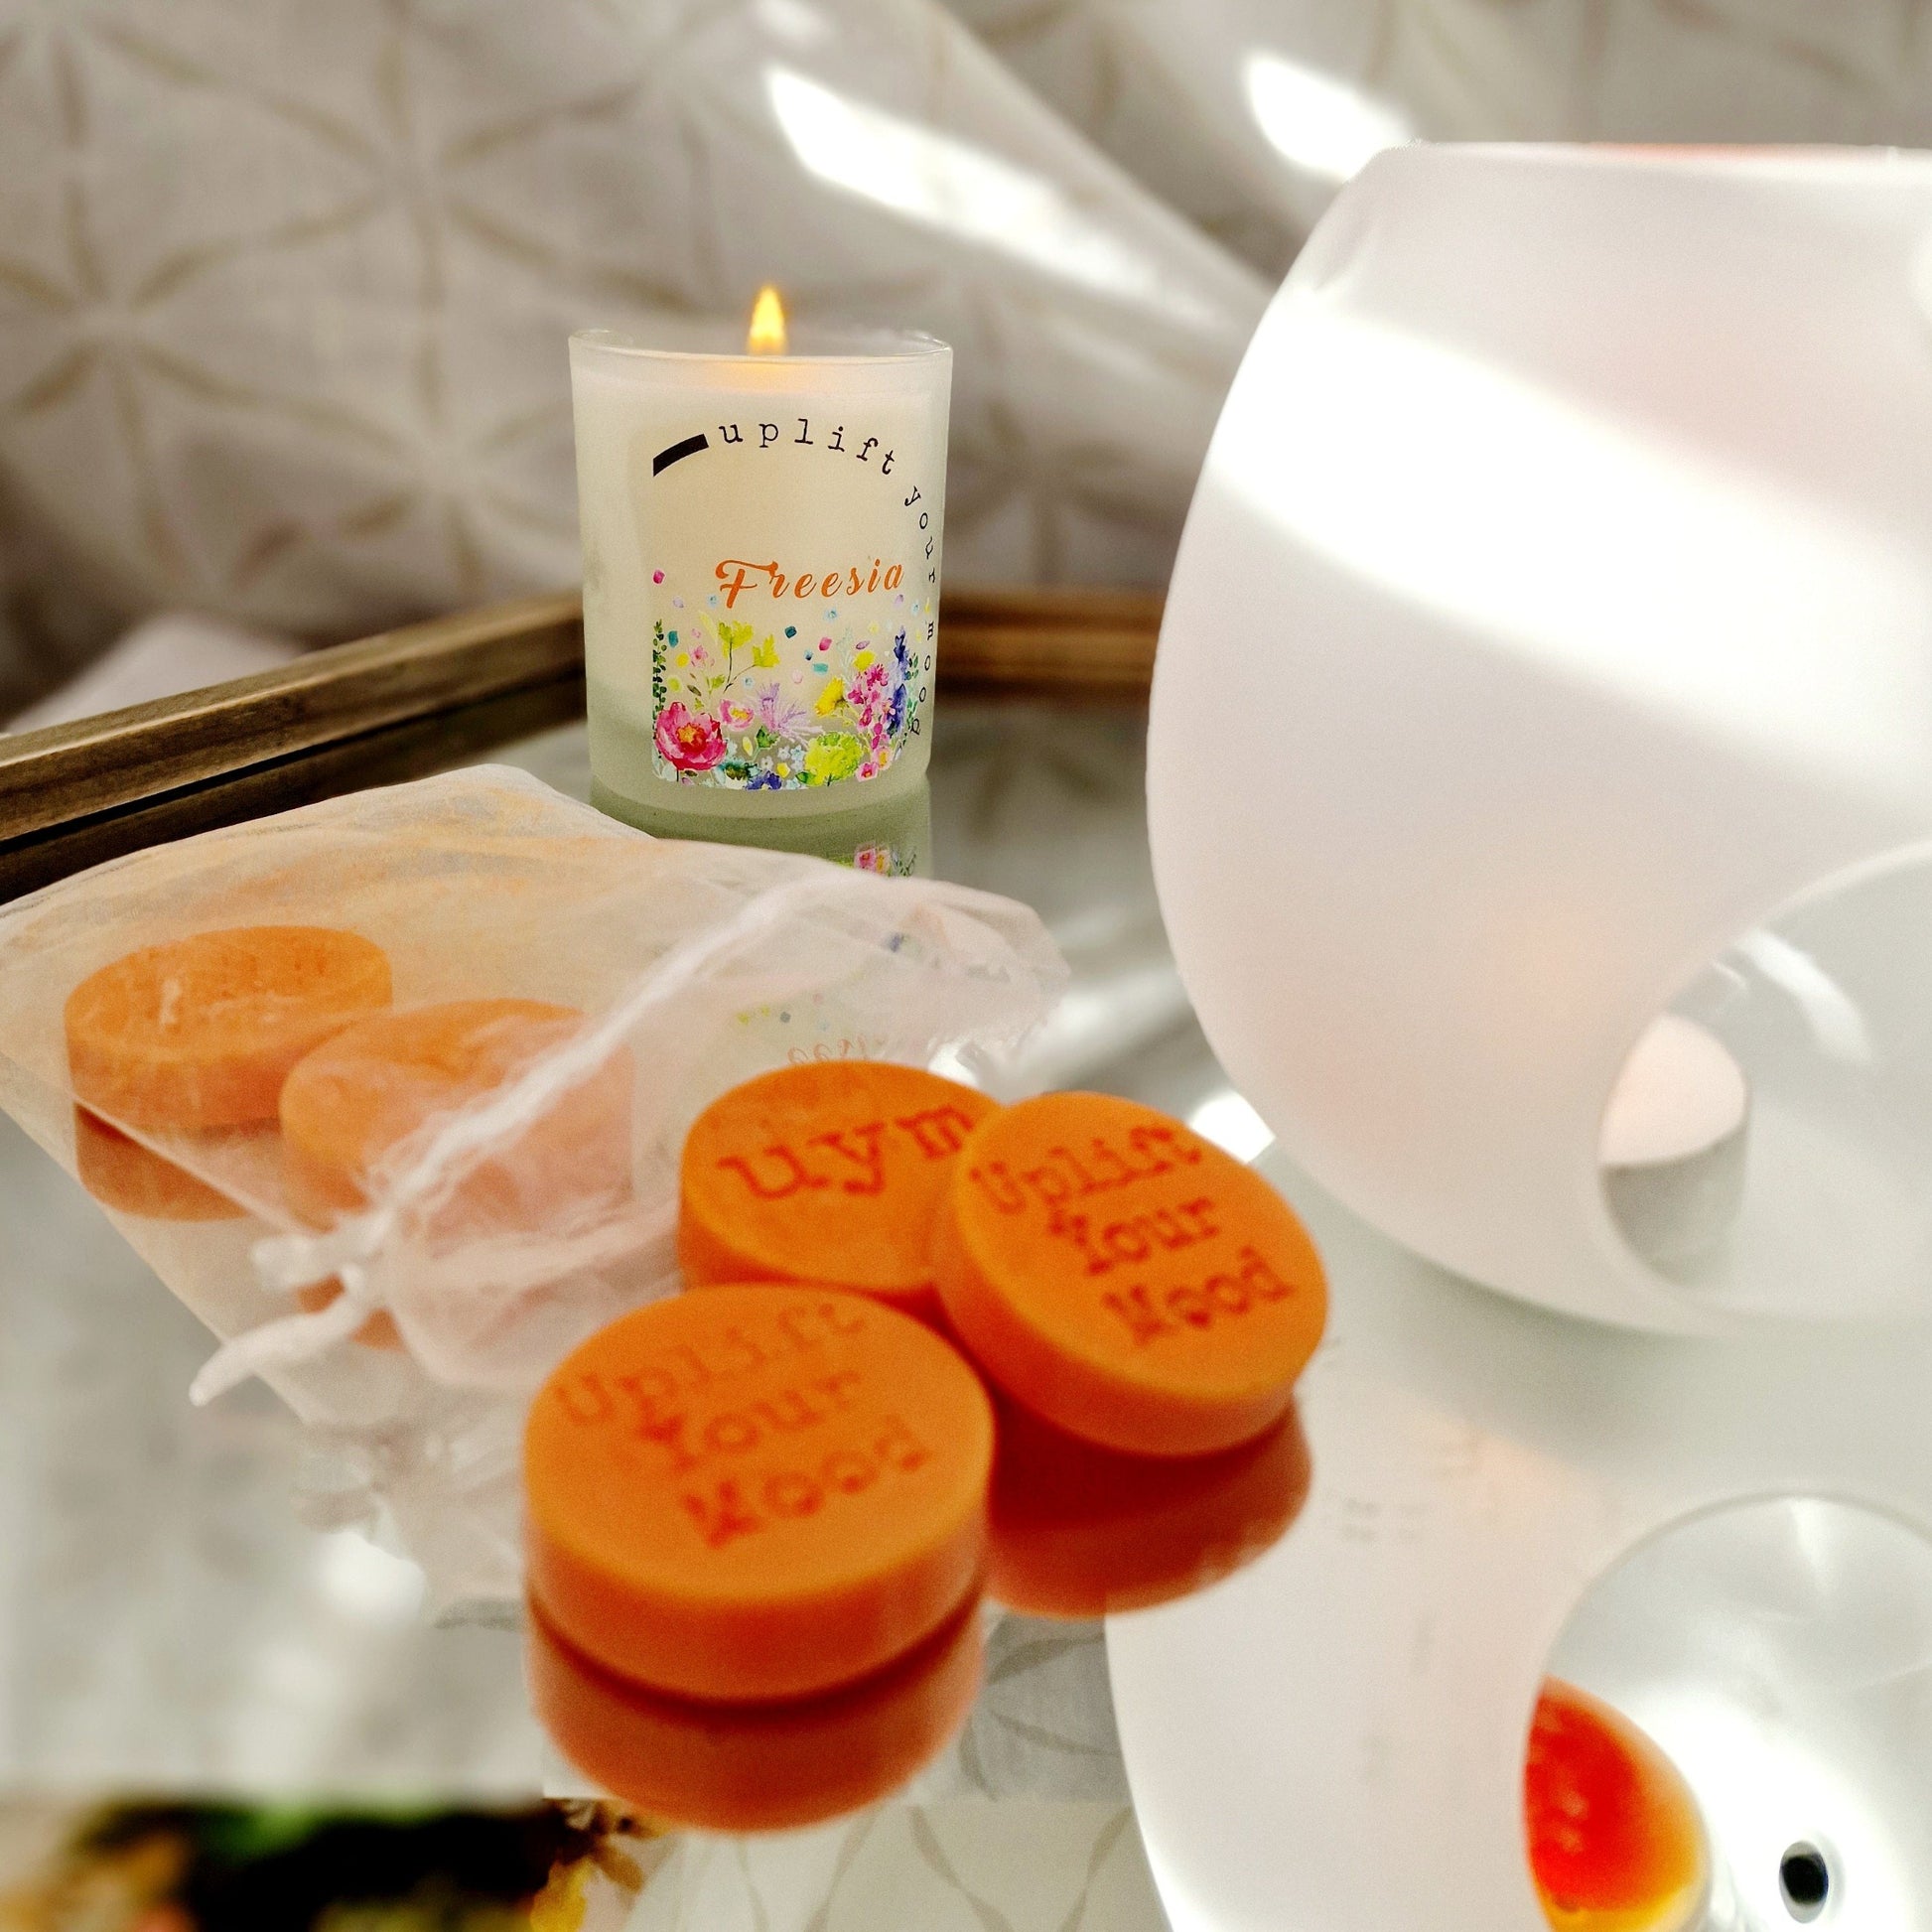 Highly scnted natural wax melts, freesia scent, orange colour, freesia candles